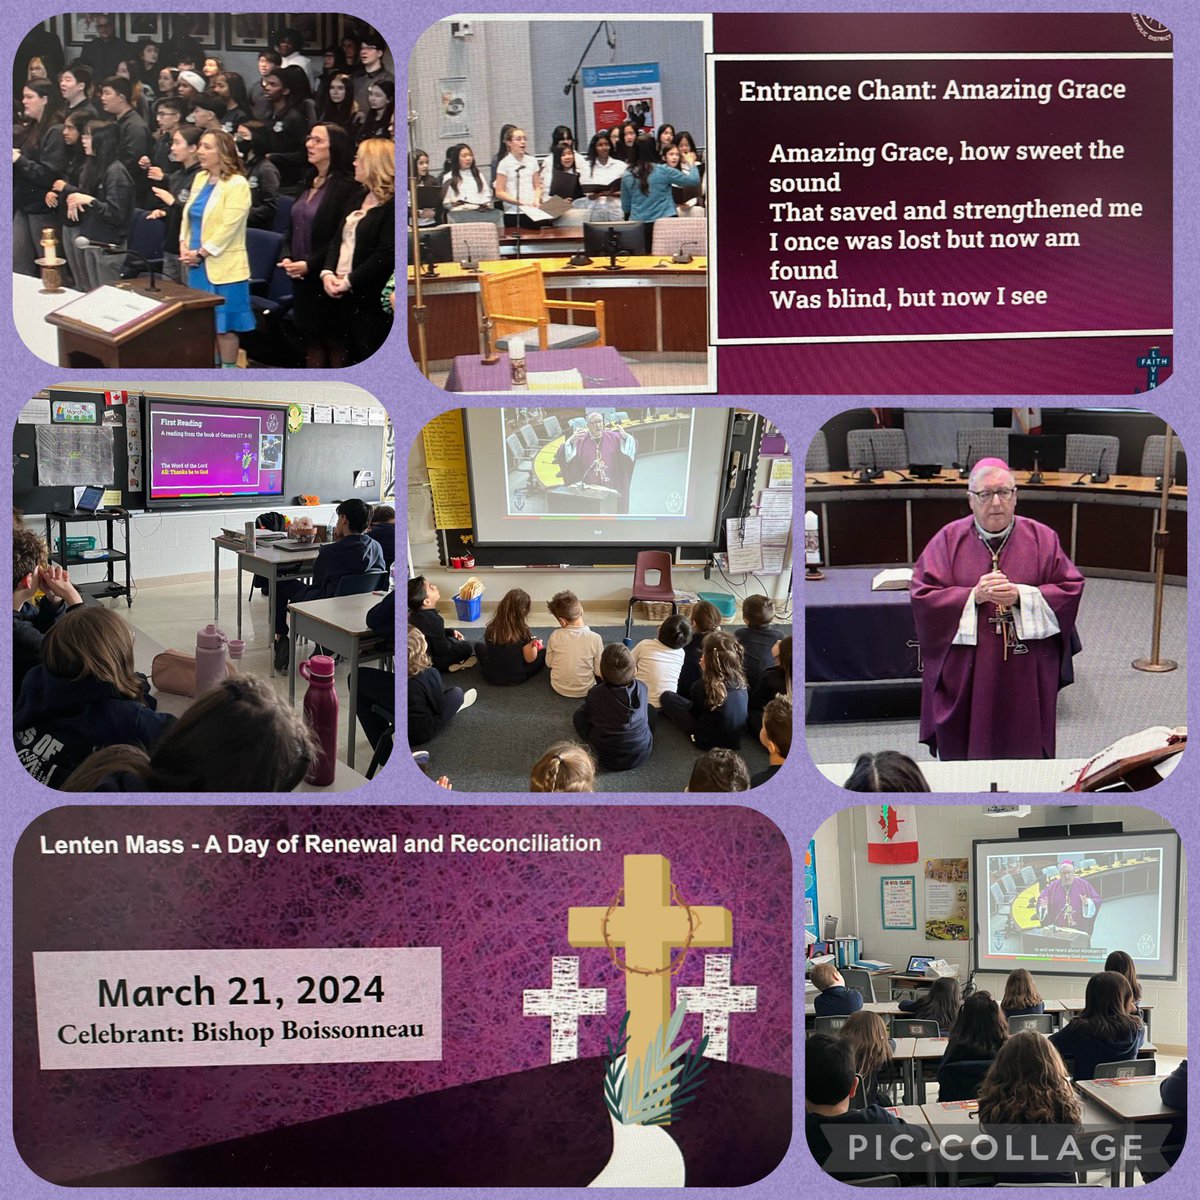 Today, we gathered as a community of faith to celebrate a Lenten Mass of Reconciliation & Renewal with Bishop Boissonneau. We prepare our 💜s for the journey we will walk with Jesus to the cross & spiritually renew our commitment to Christ. 🌿✝️ @angelasaggese9 @paonesl @YCDSB